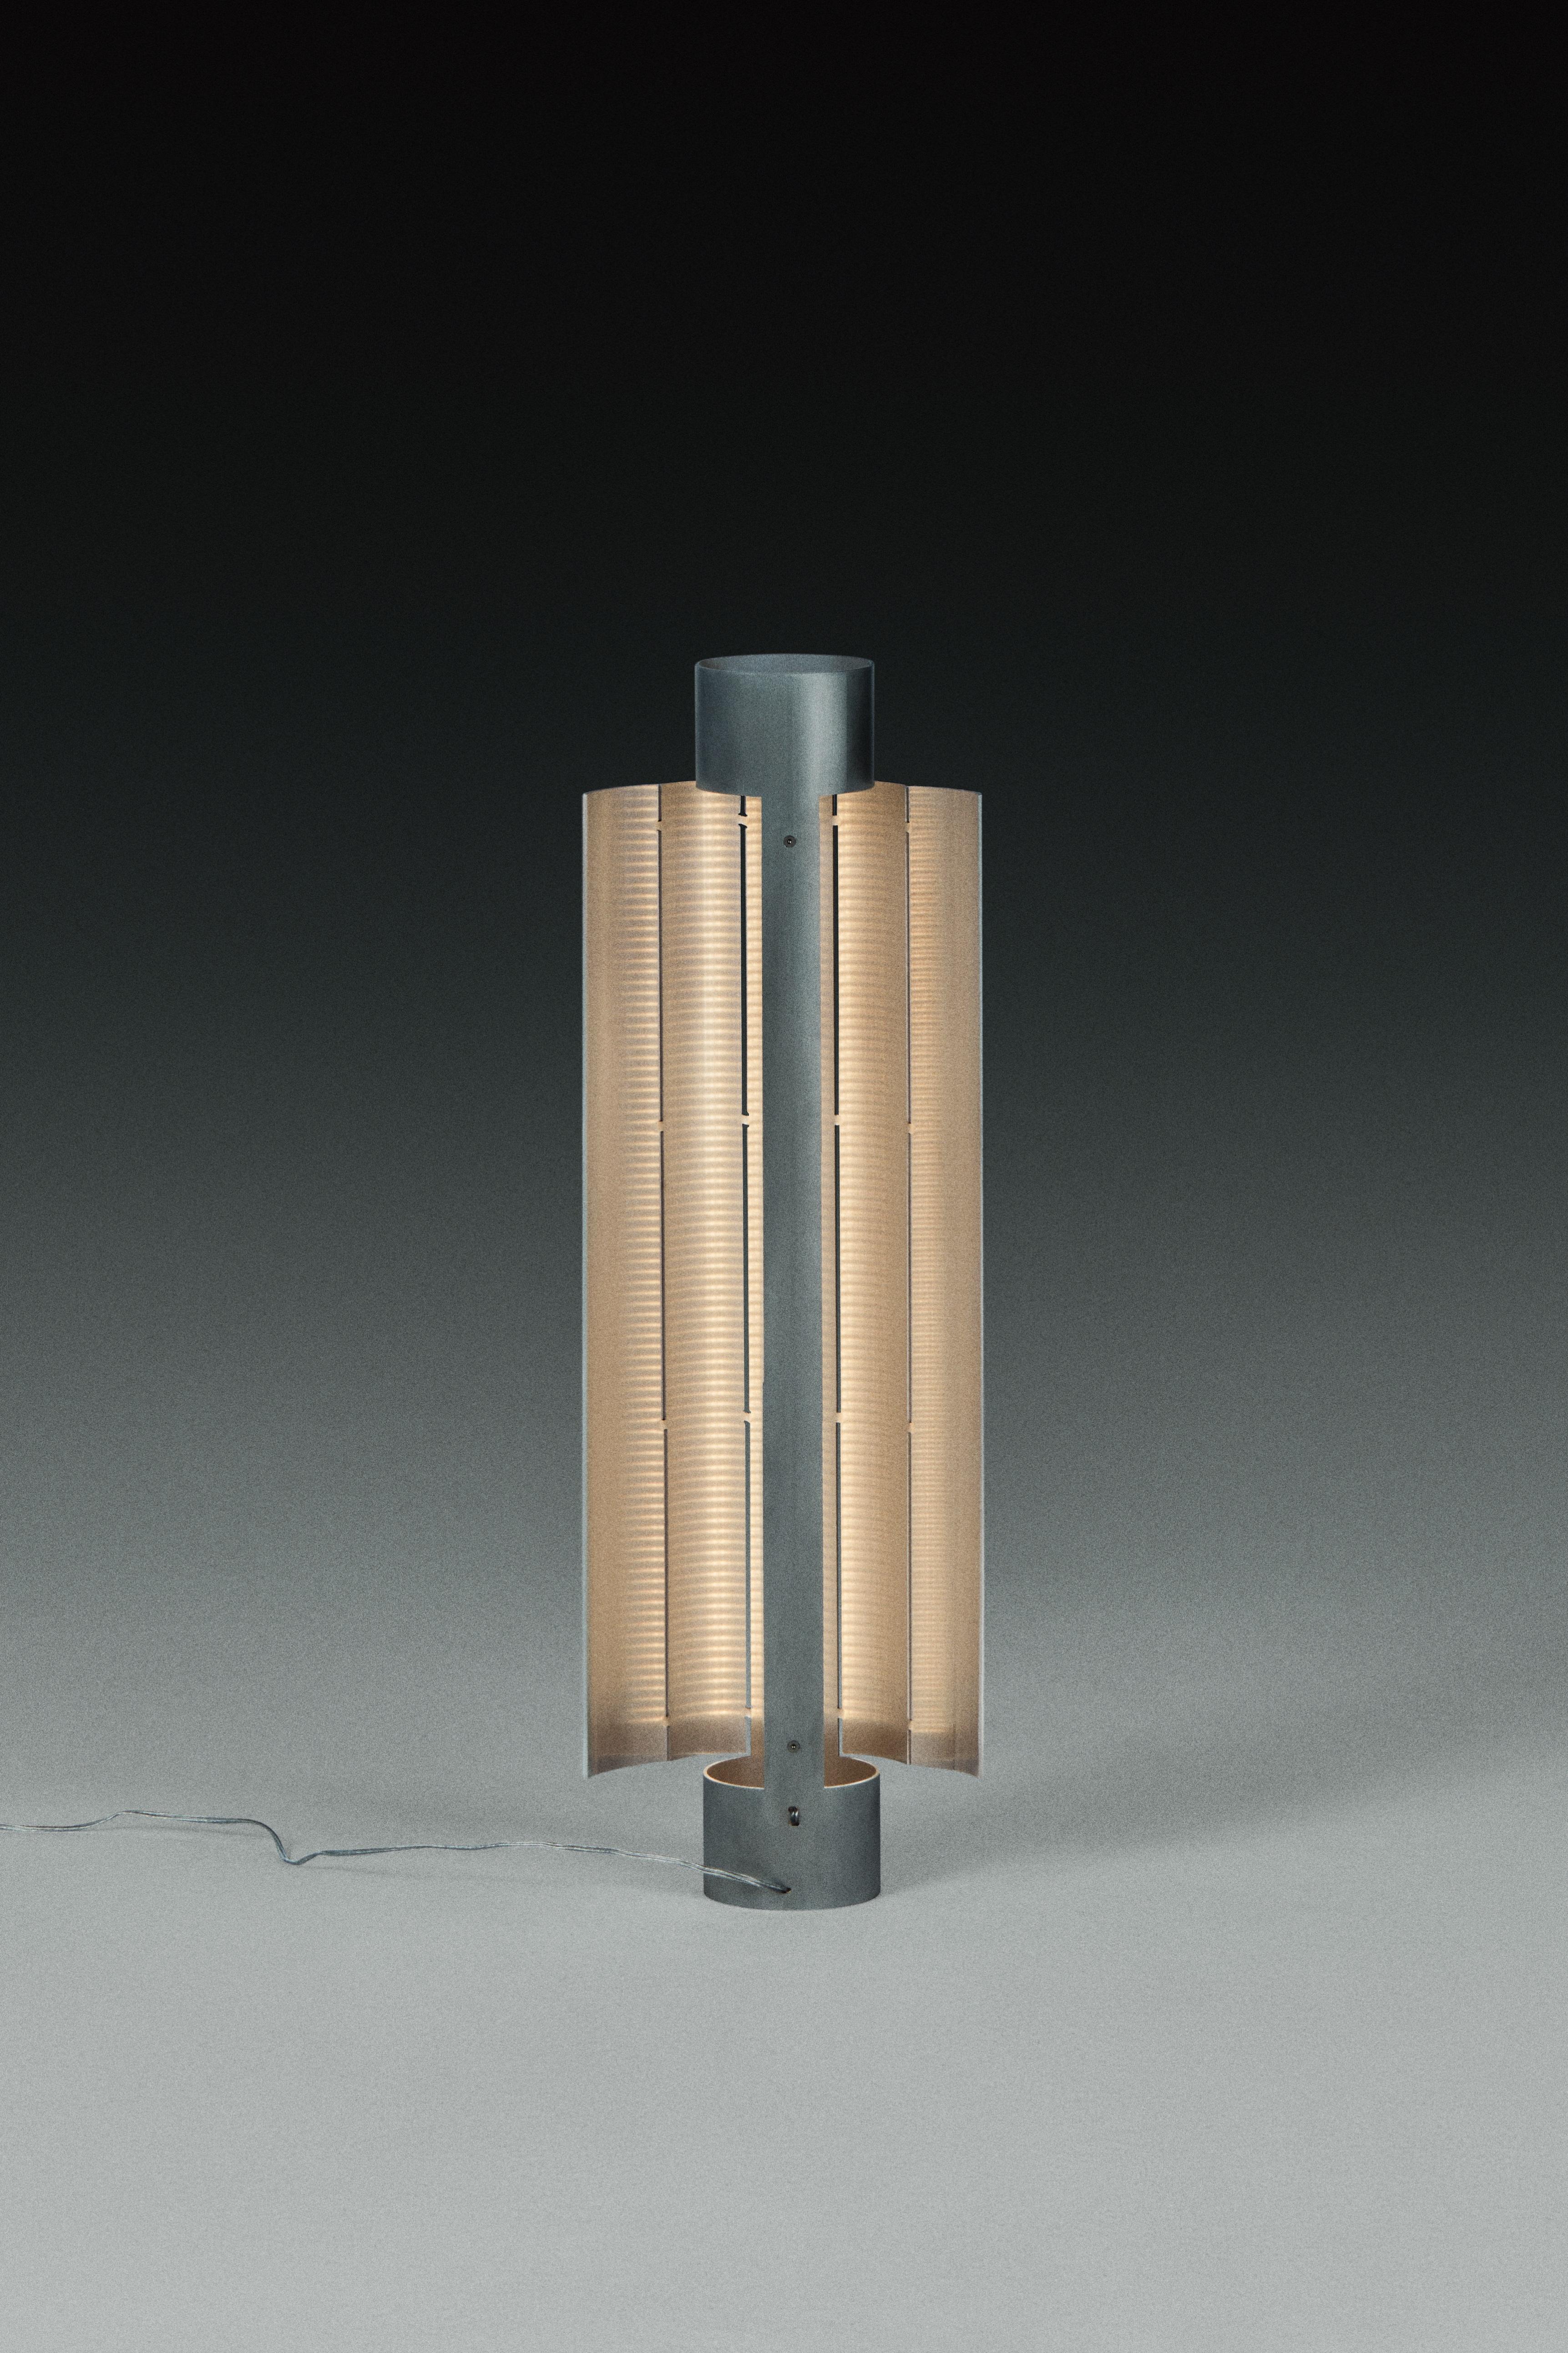 Gvpo Table Lamp by Kutarq Studio
Materials: Aluminum.
Dimensions: D 21 x W 8 x H 56 cm

Matt aluminum, patinated by hand.
Lightsource: 2 x parallel warm LED stripes, IP20 24V 14,4W/m - 72W 2700K, dimmable.

The GVPO Table Lamp is expertly crafted